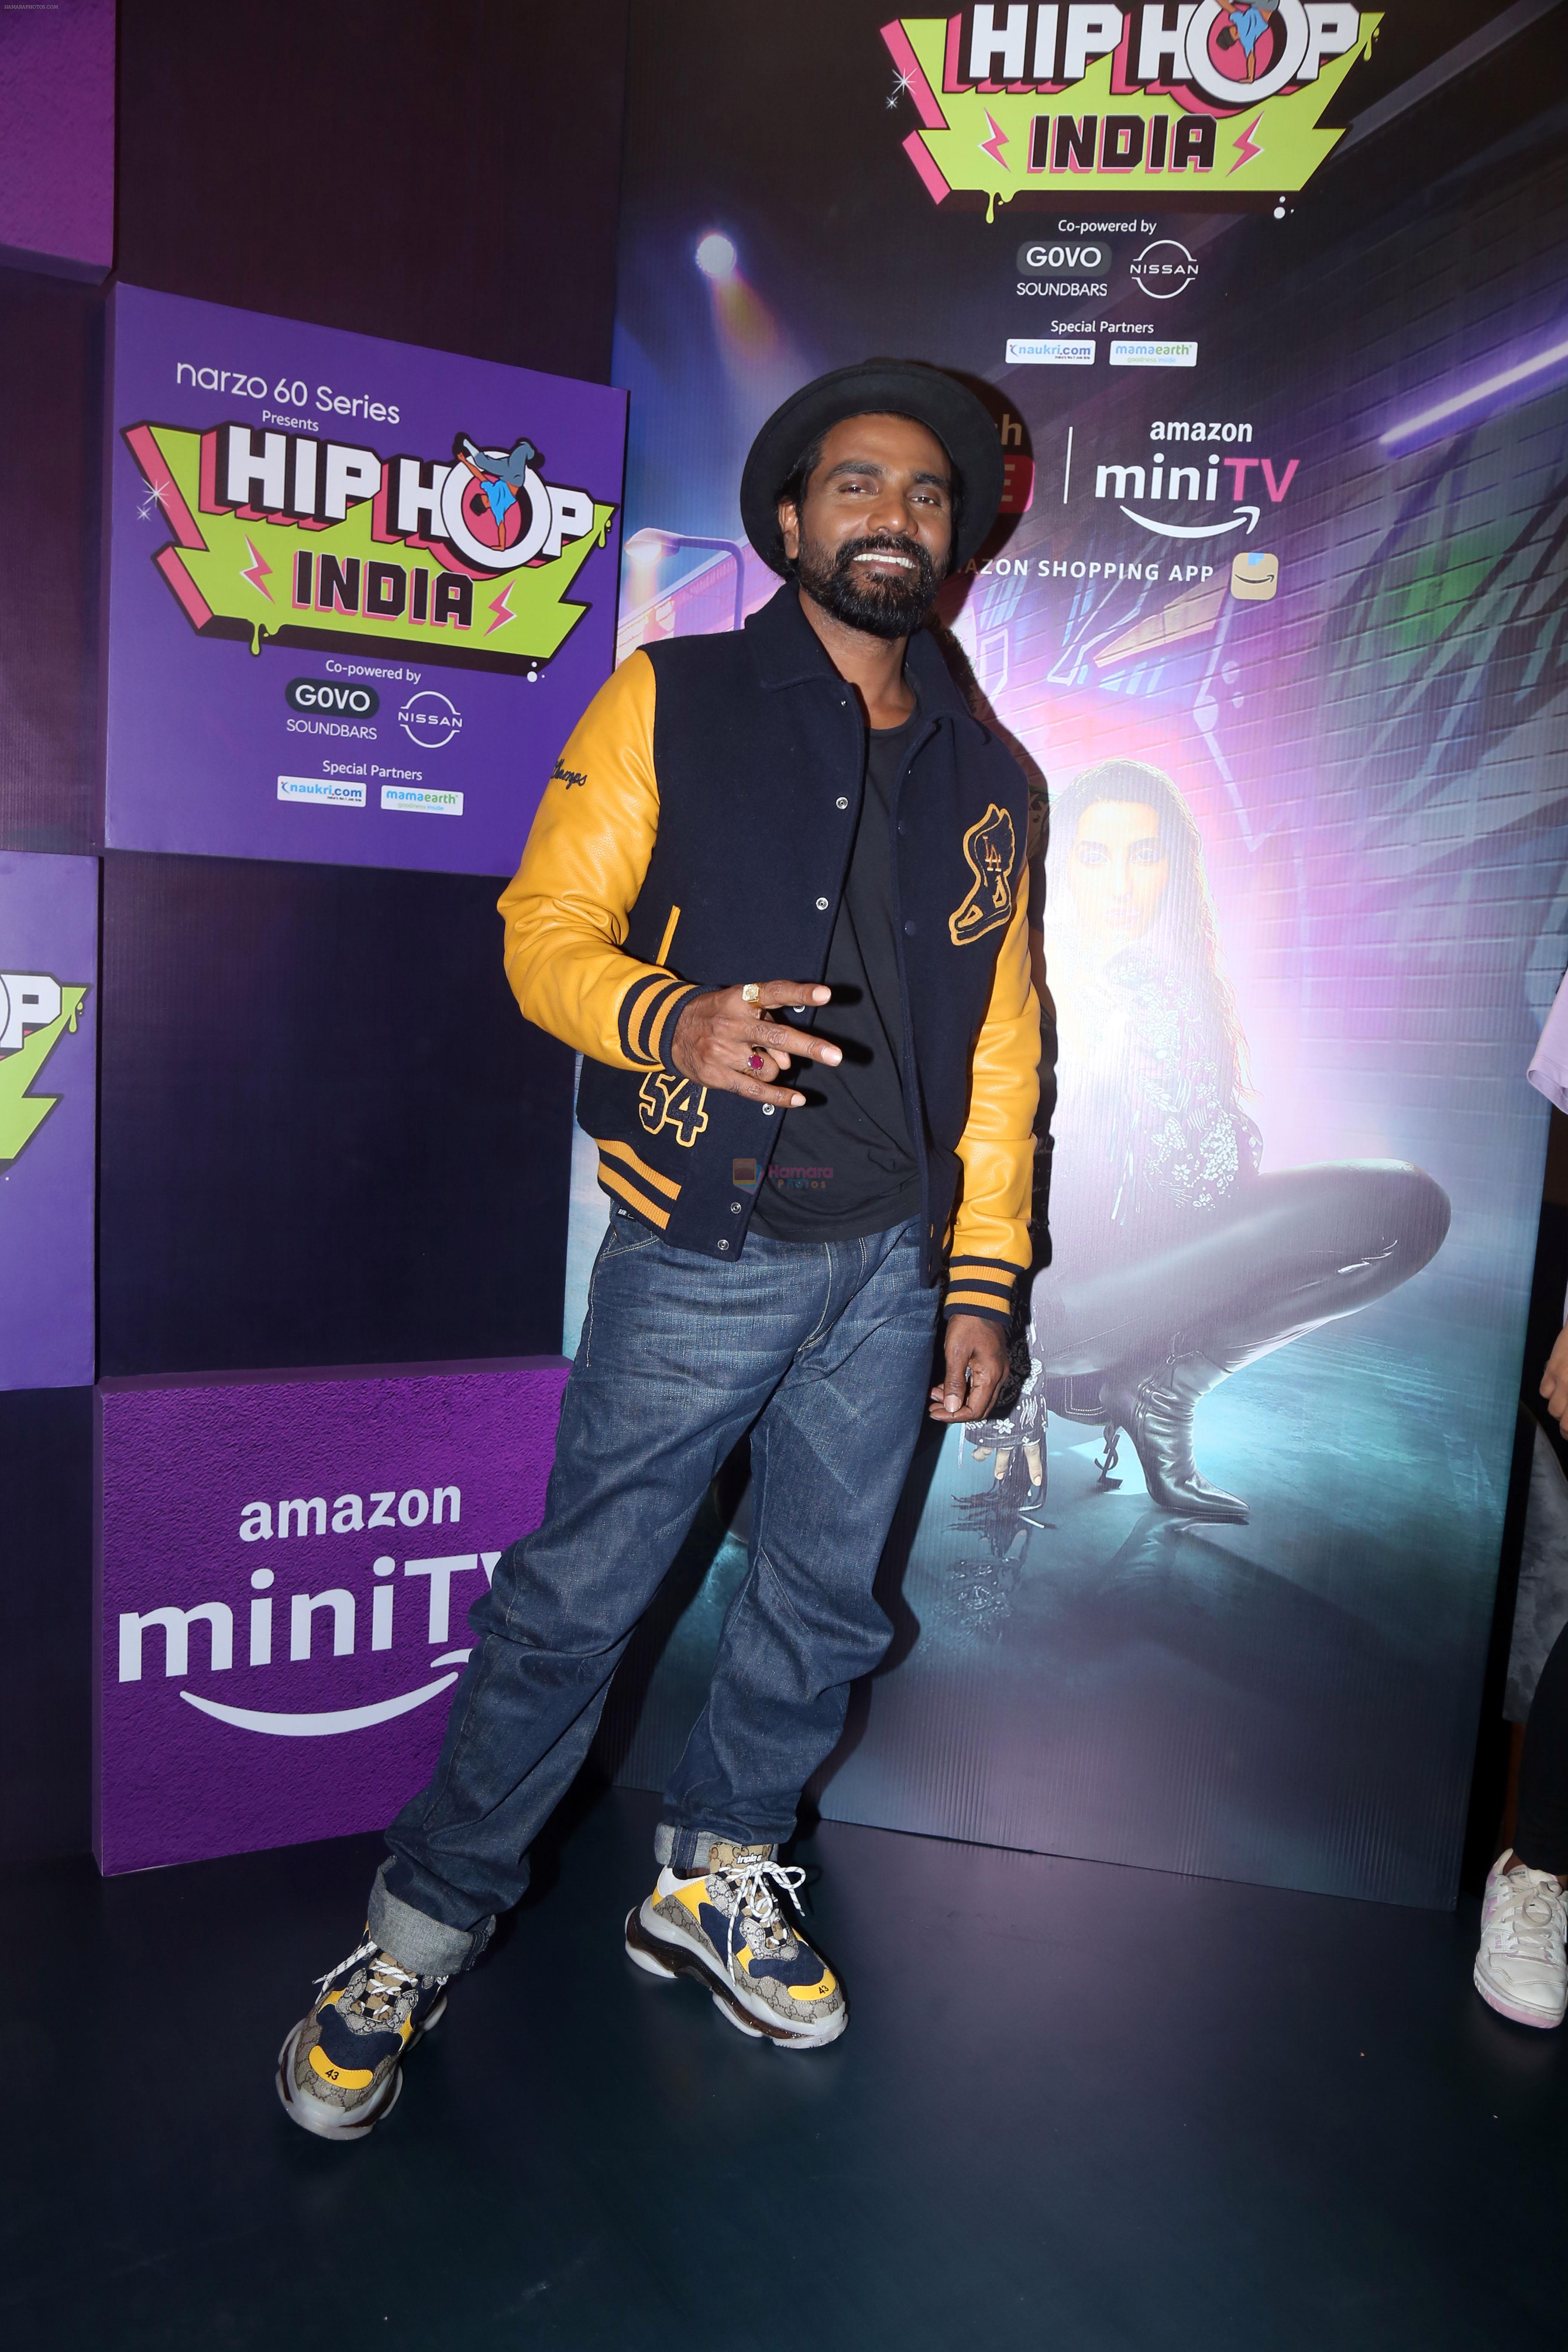 Remo D'souza promoting Reality Dance Show Hip Hop India at Novotel Juhu on 28 July 2023